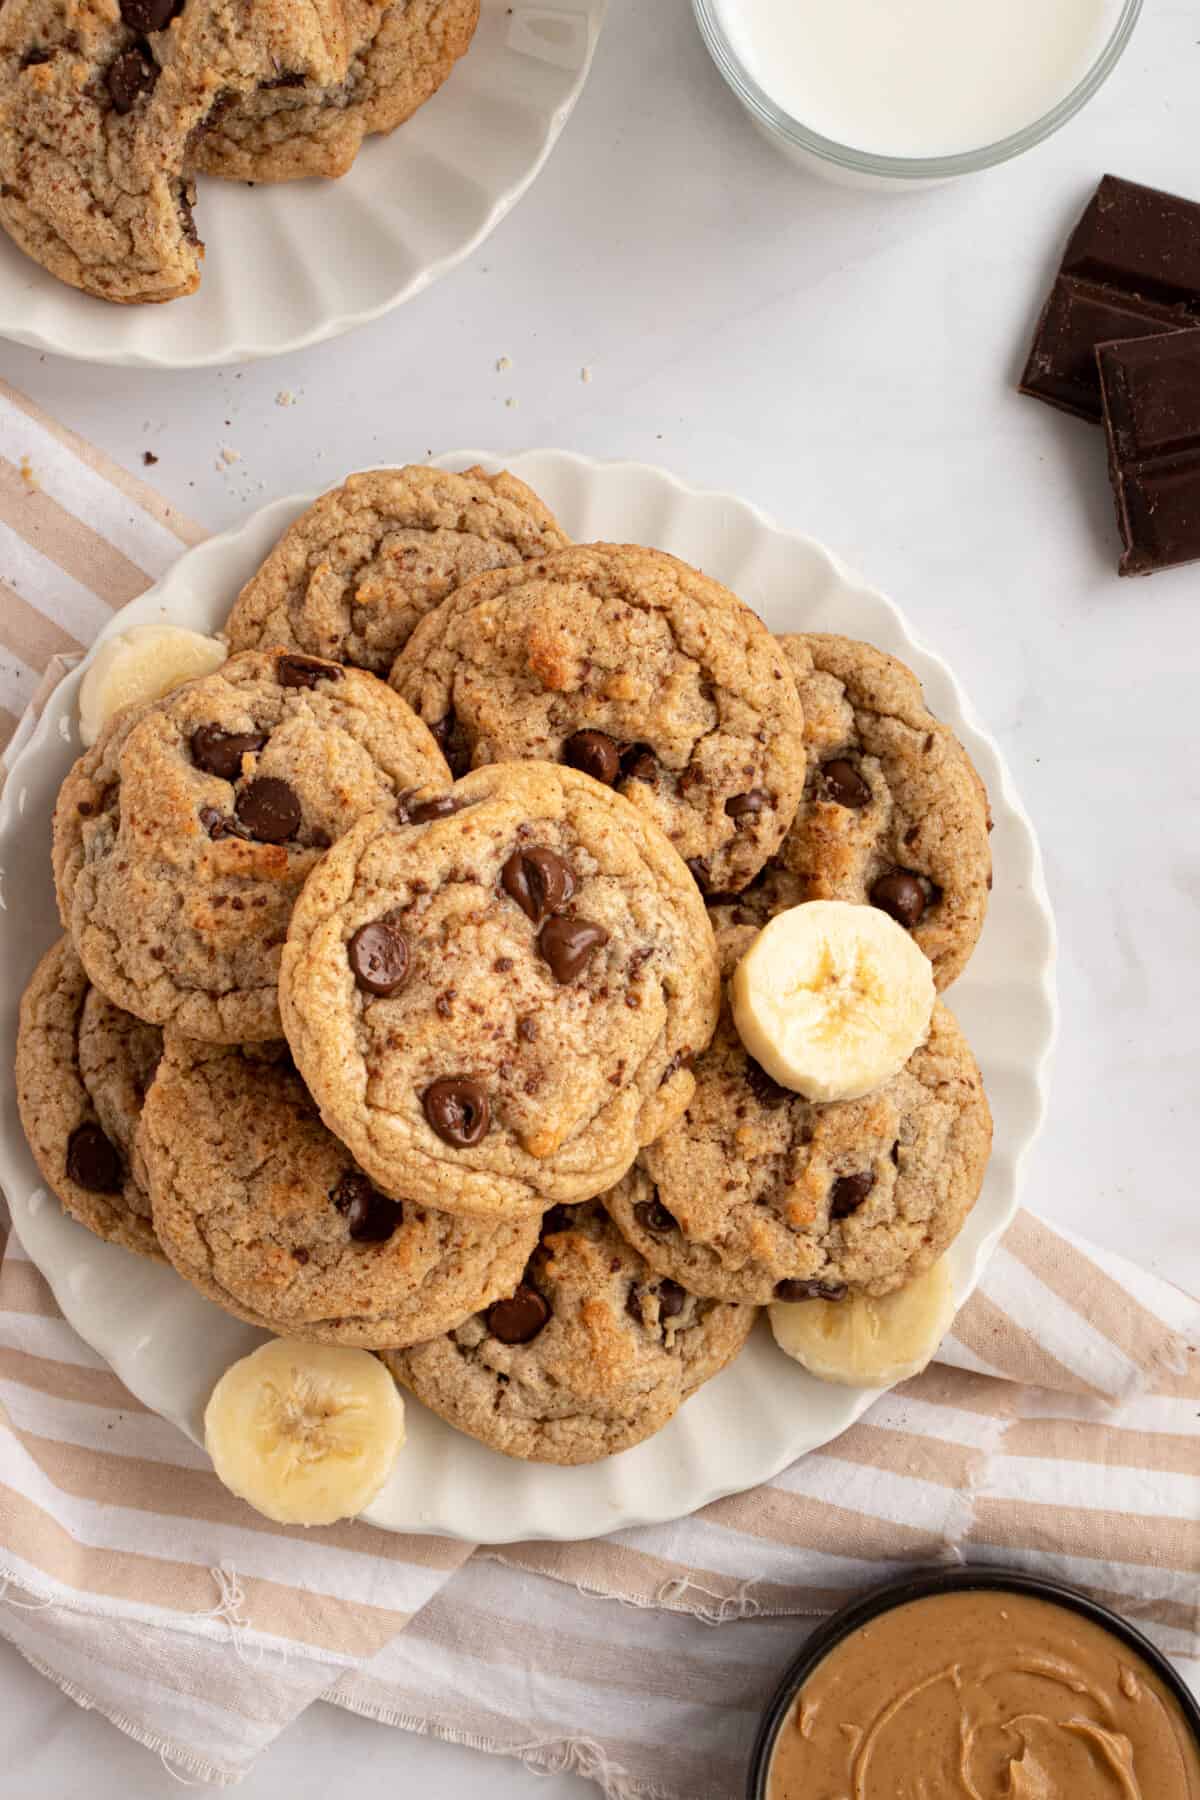 Plate of banana peanut butter chocolate chip cookies.